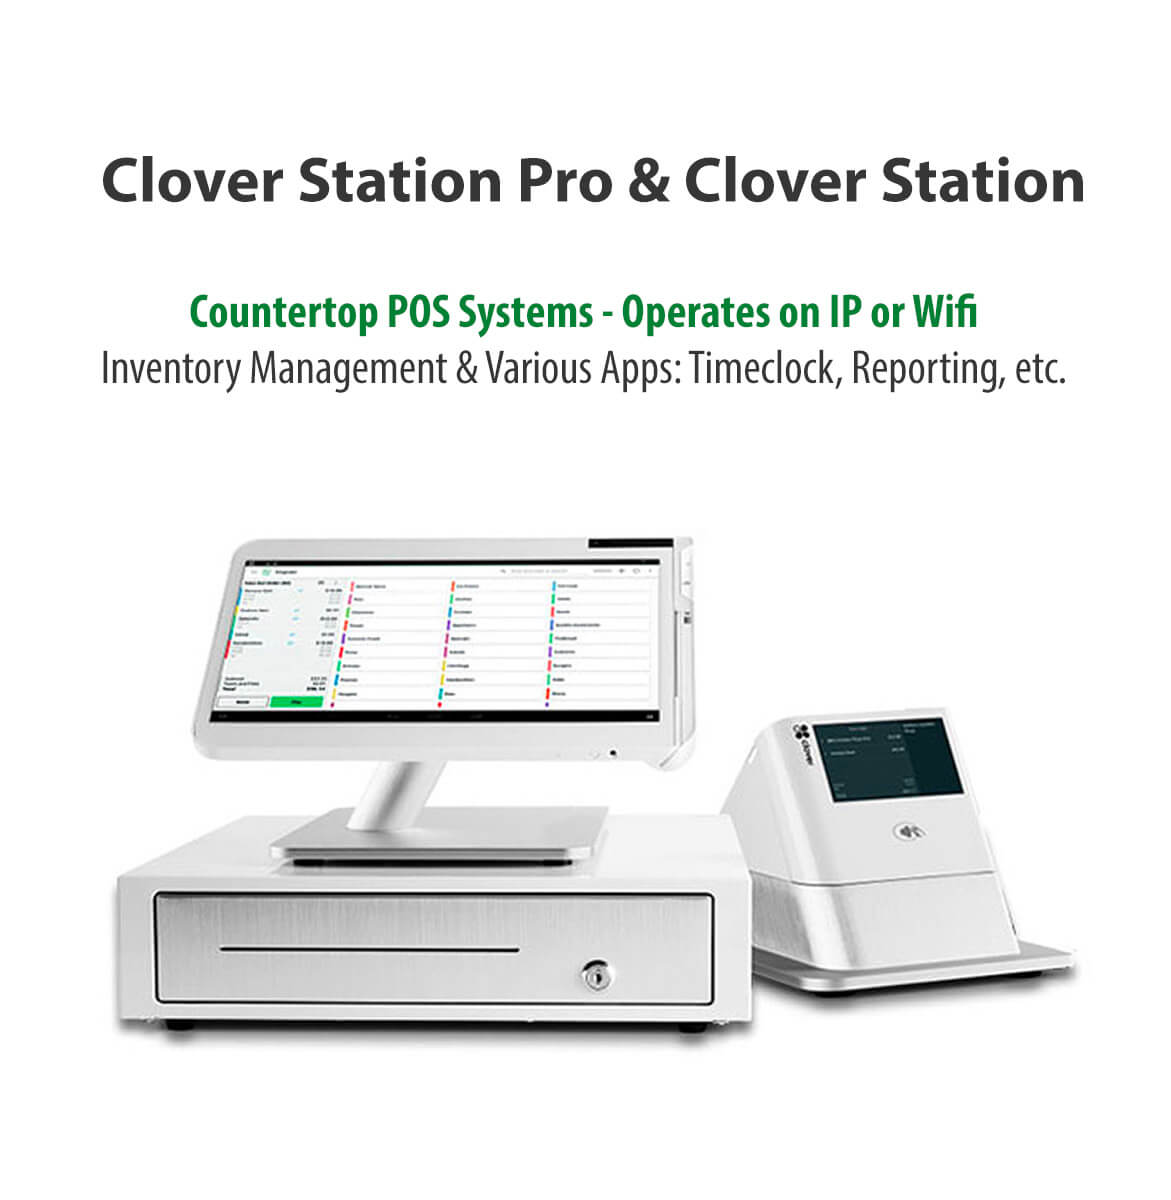 Clover Station Pro & Station - Countertop POS Systems - Operates on IP or Wifi, Inventory Management & Various Apps: Timeclock, reporting, etc.